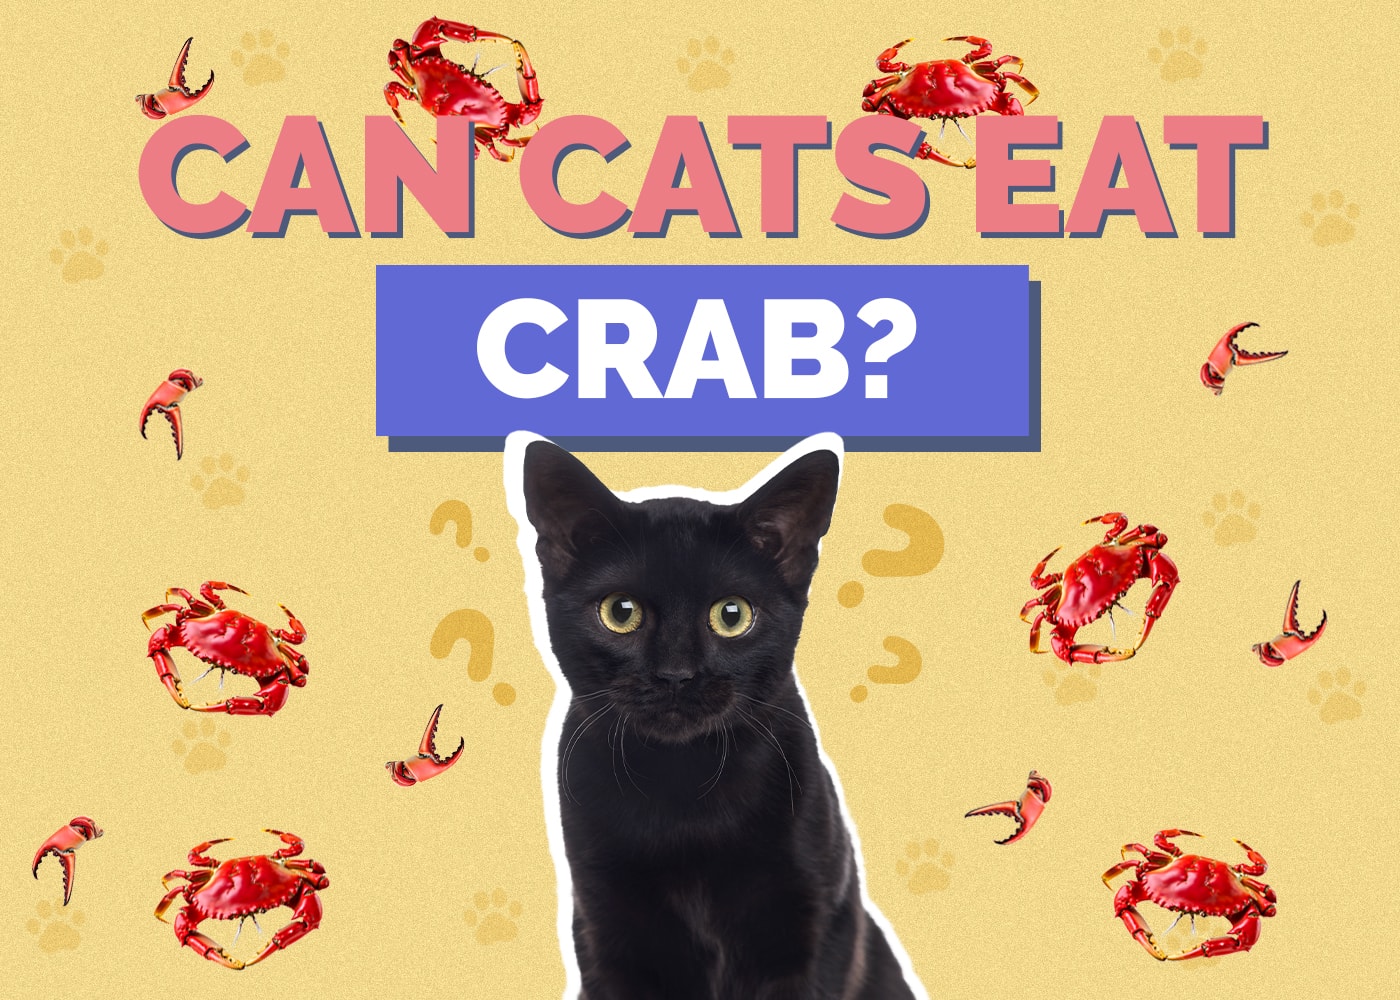 Can Cats Eat crab